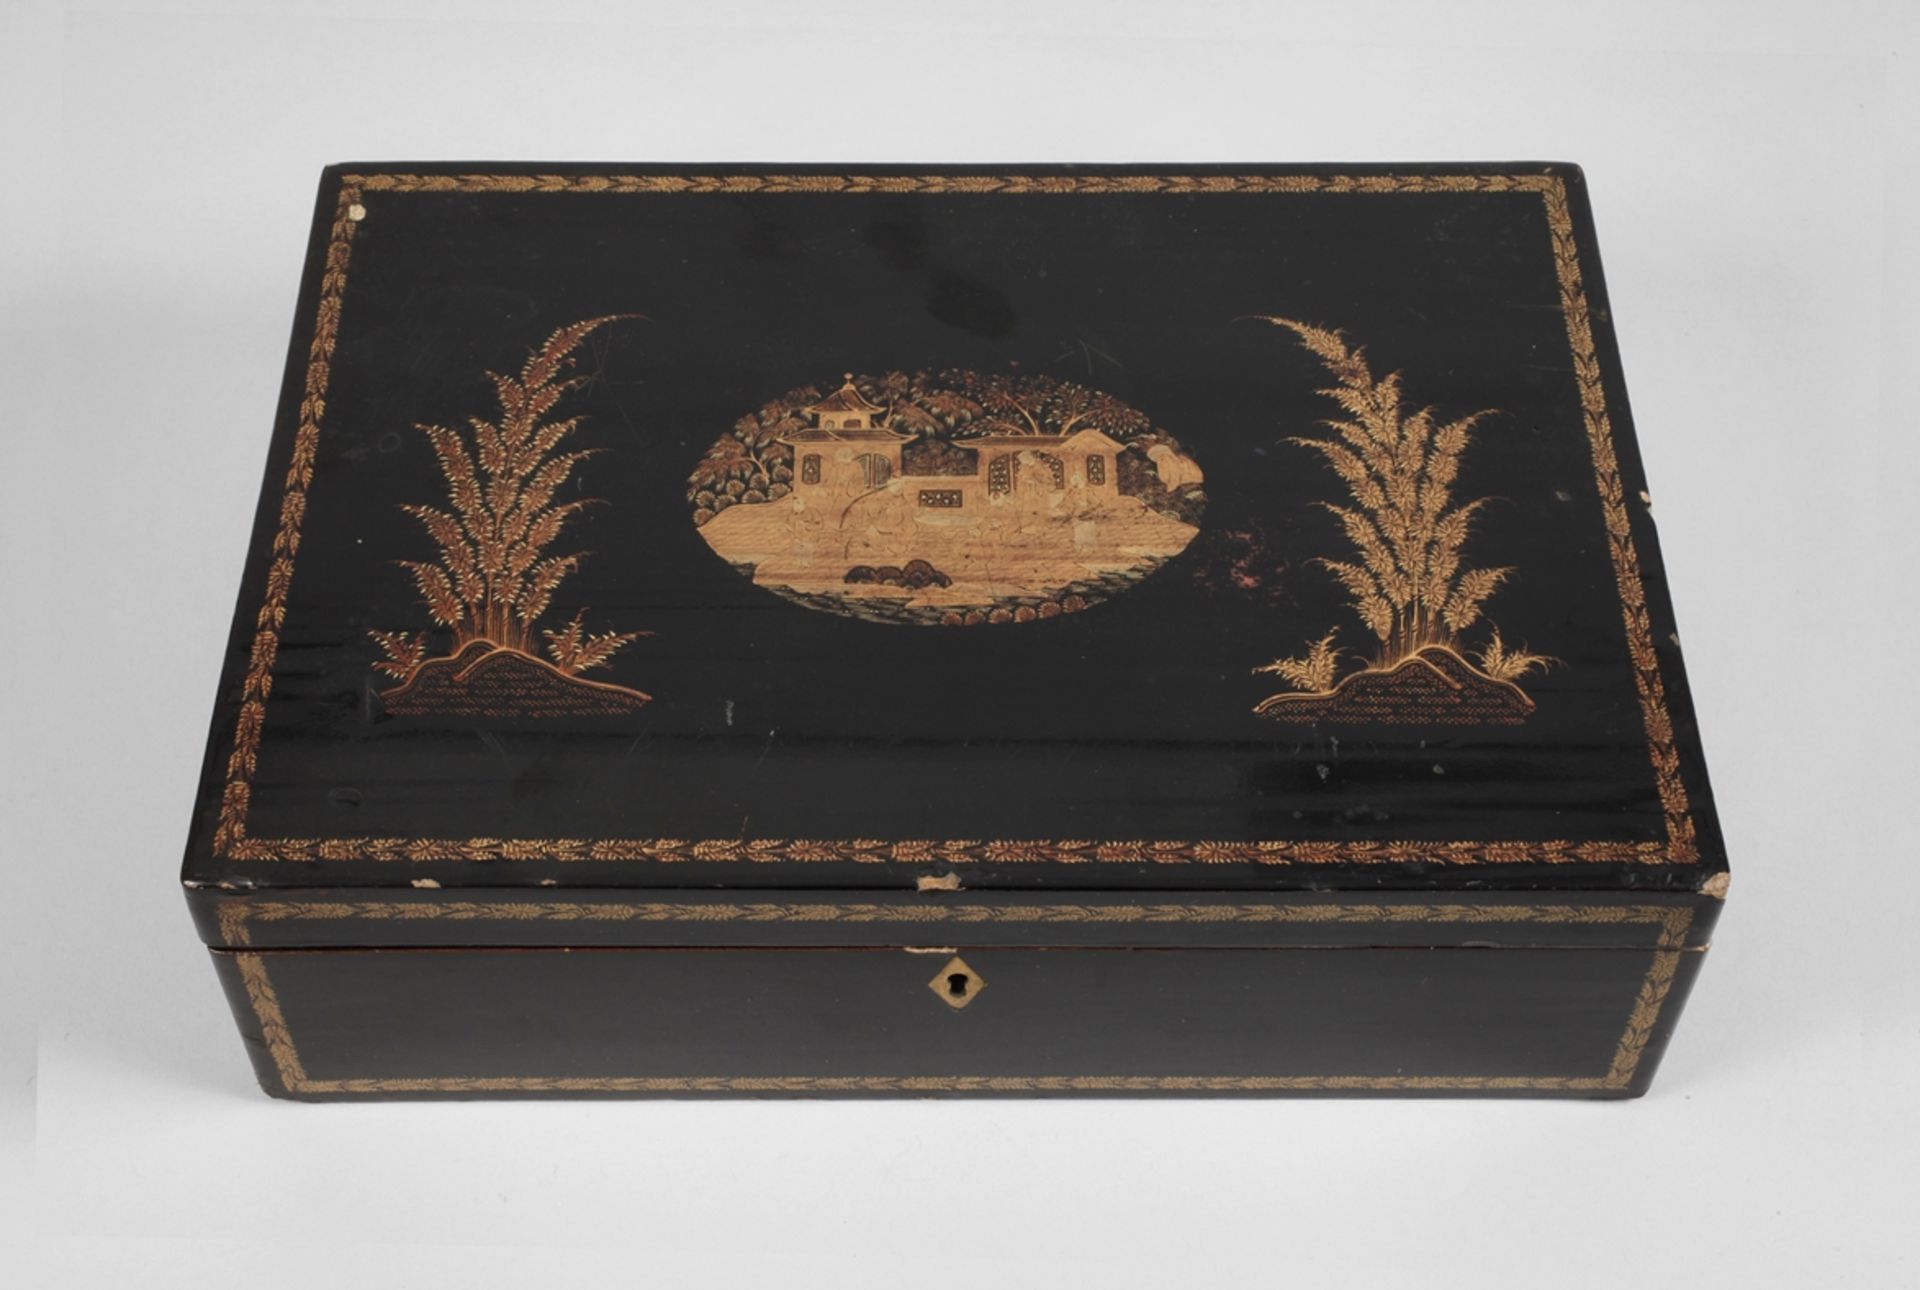 Lacquer box with chinoiserie